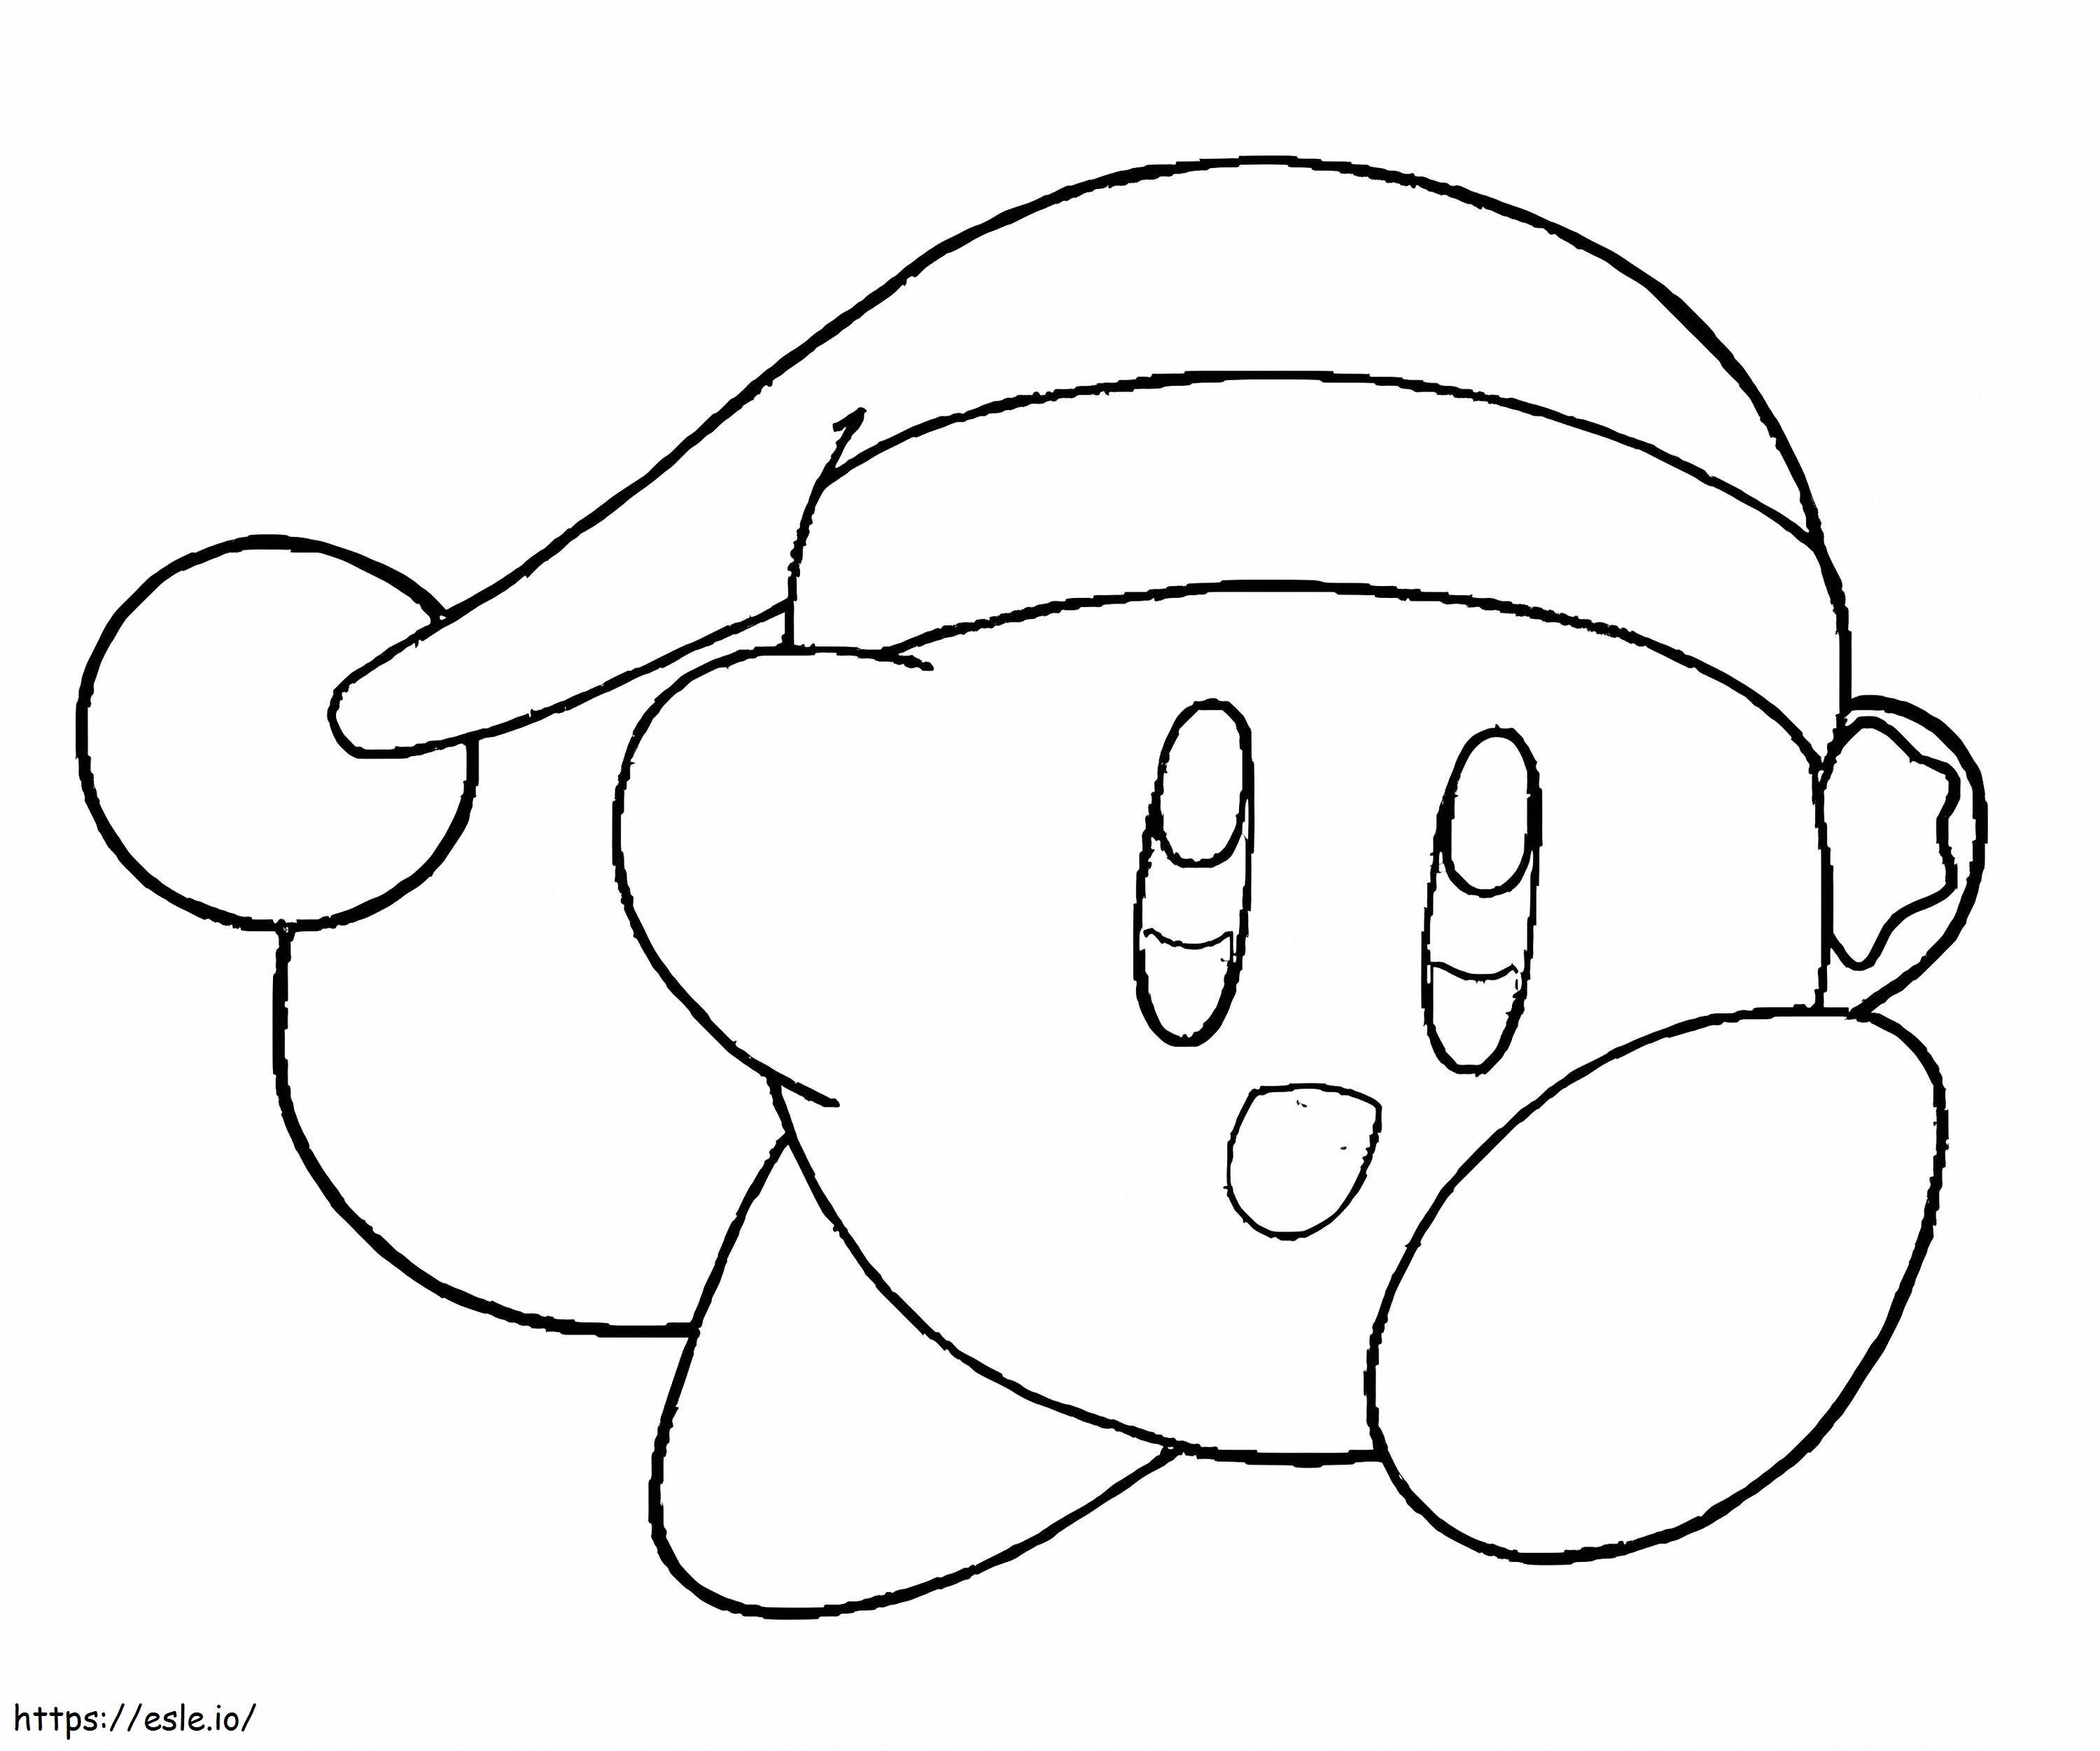 Printable Kirby coloring page